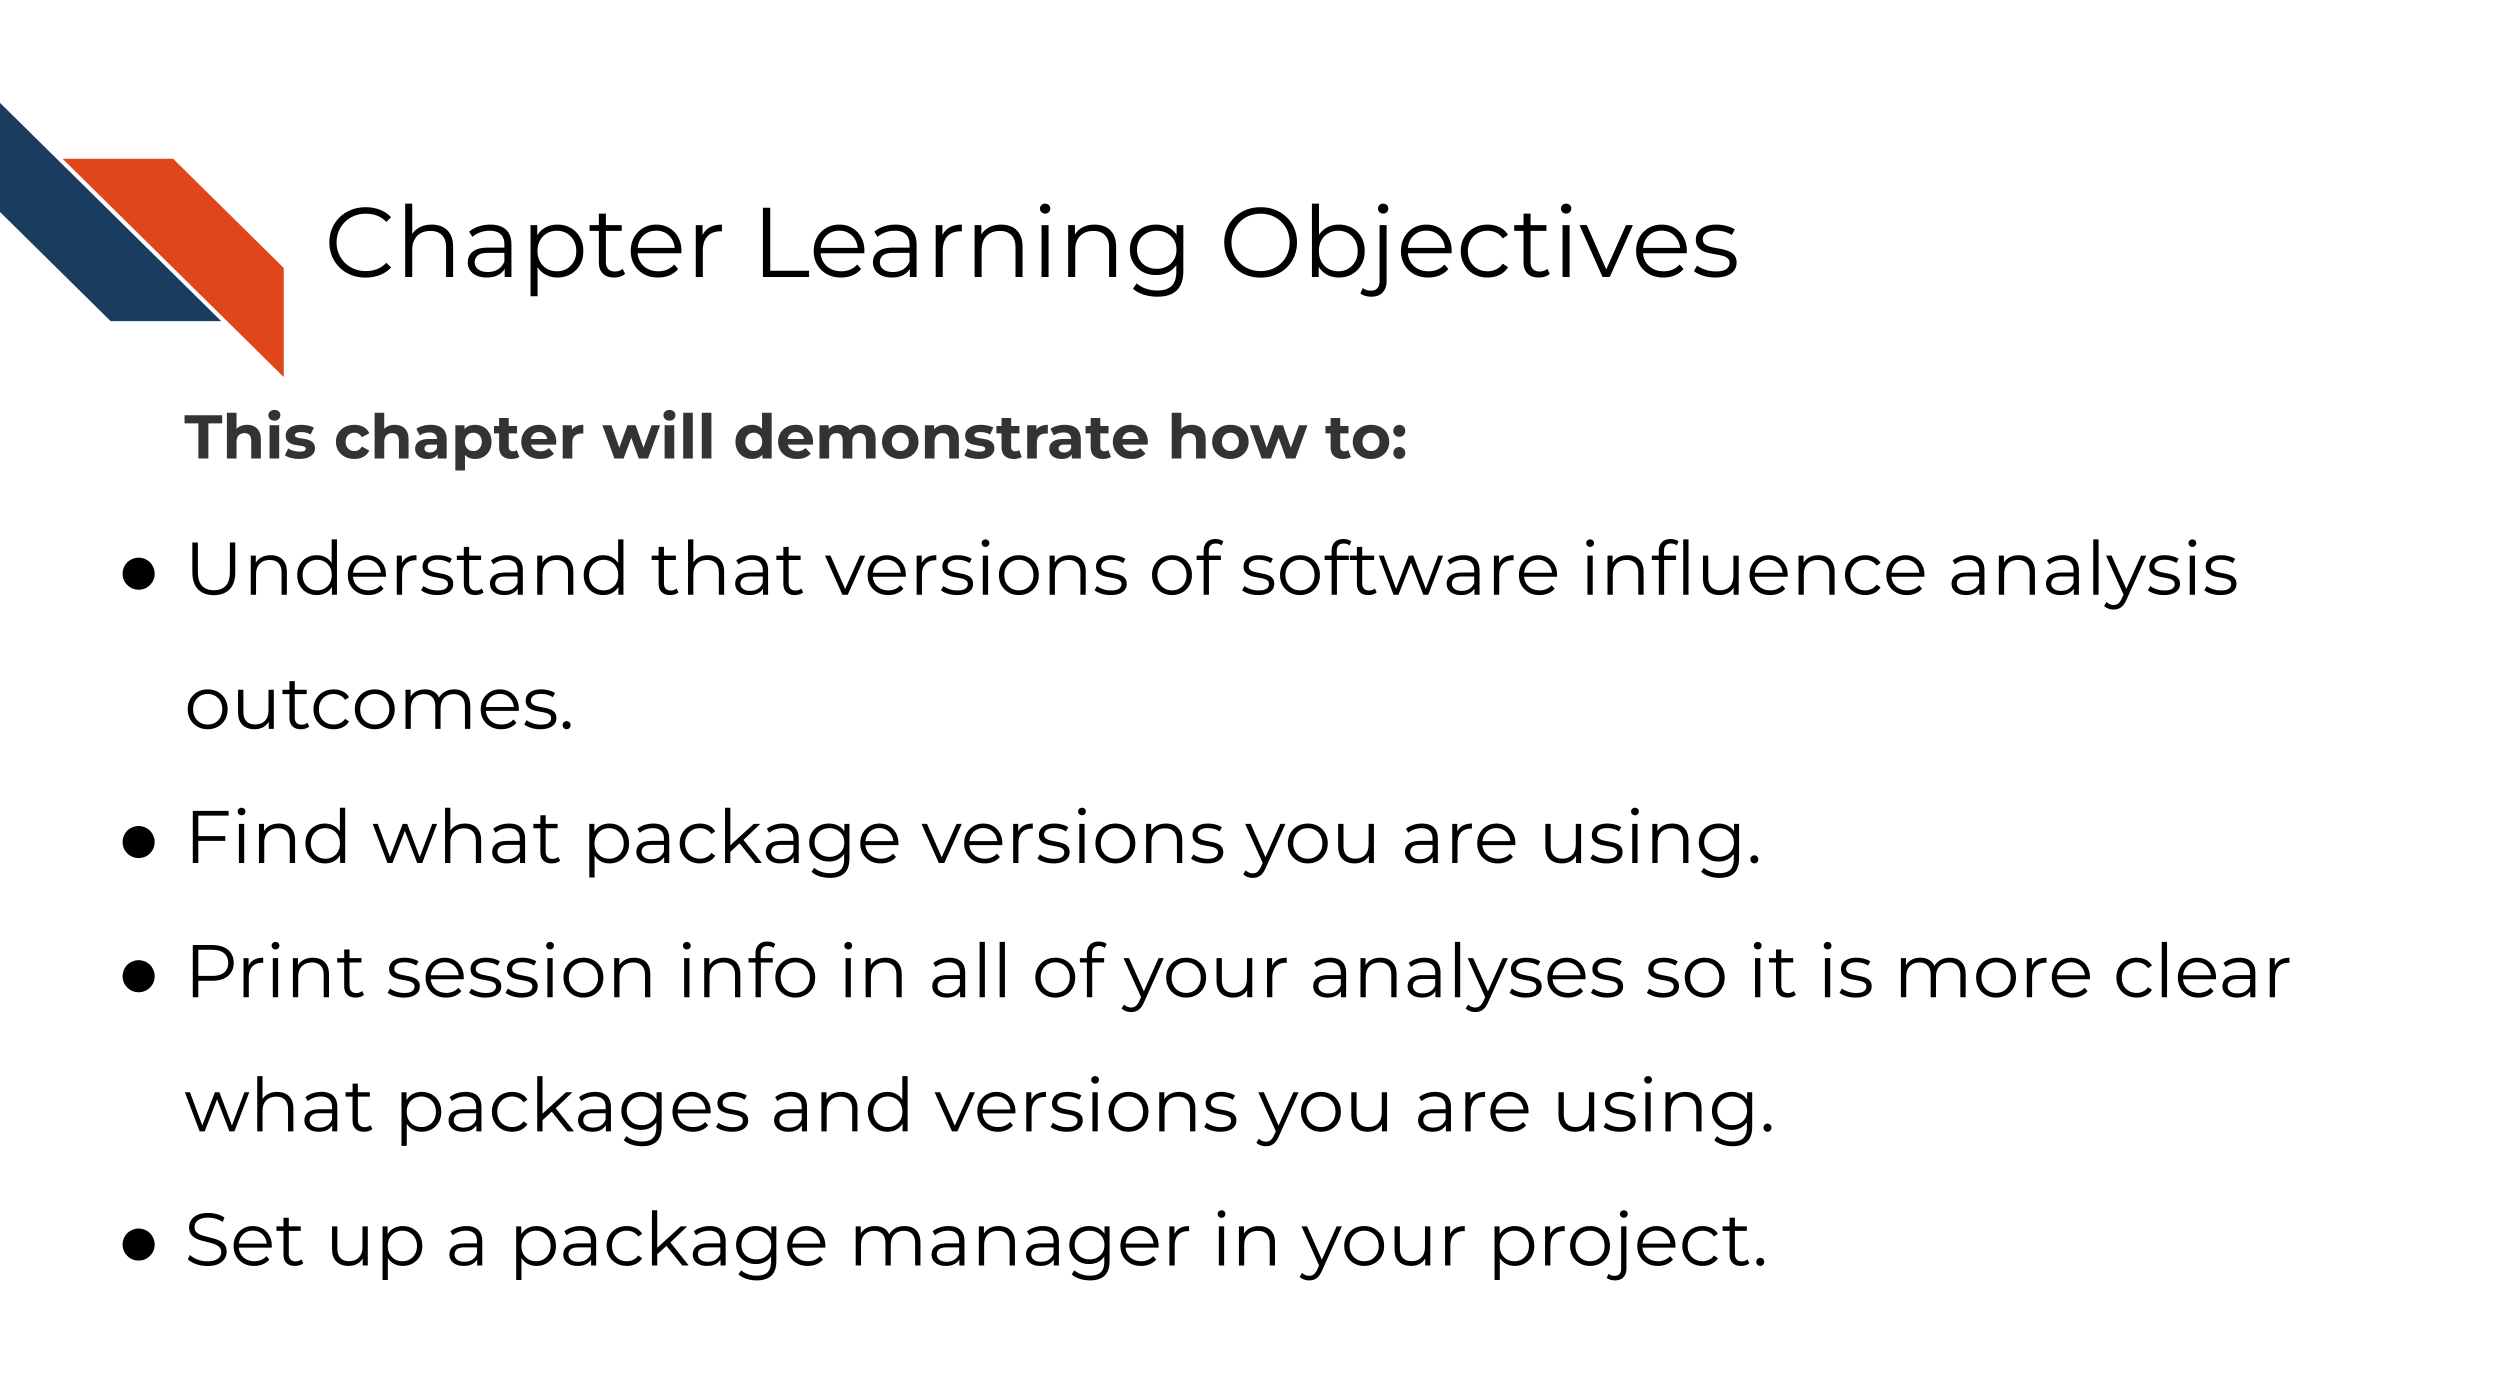 This chapter will demonstrate how to: Understand that versions of software influence analysis outcomes. Find what package versions you are using. Print session info in all of your analyses so it is more clear what packages and versions you are using.